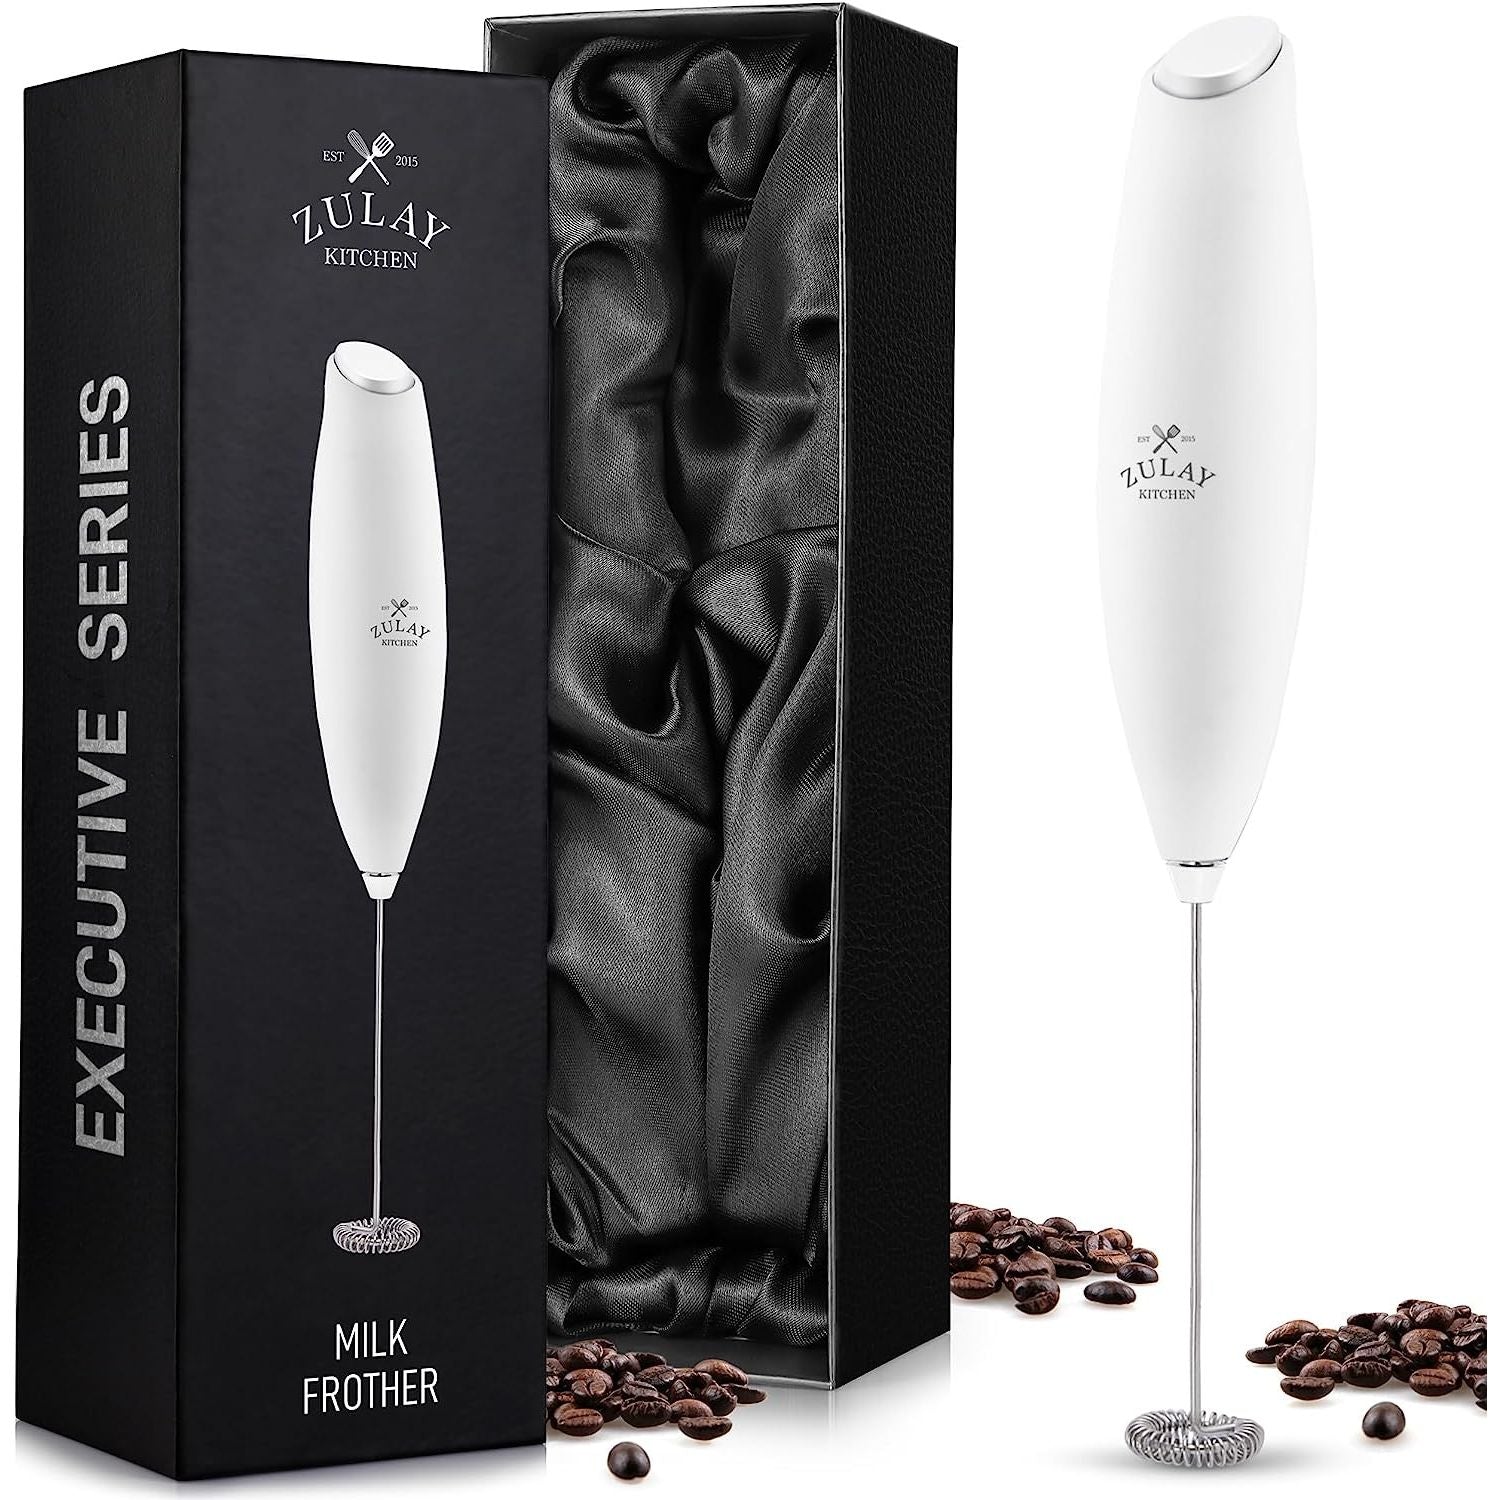 Milk Boss Milk Frother (Without Stand)